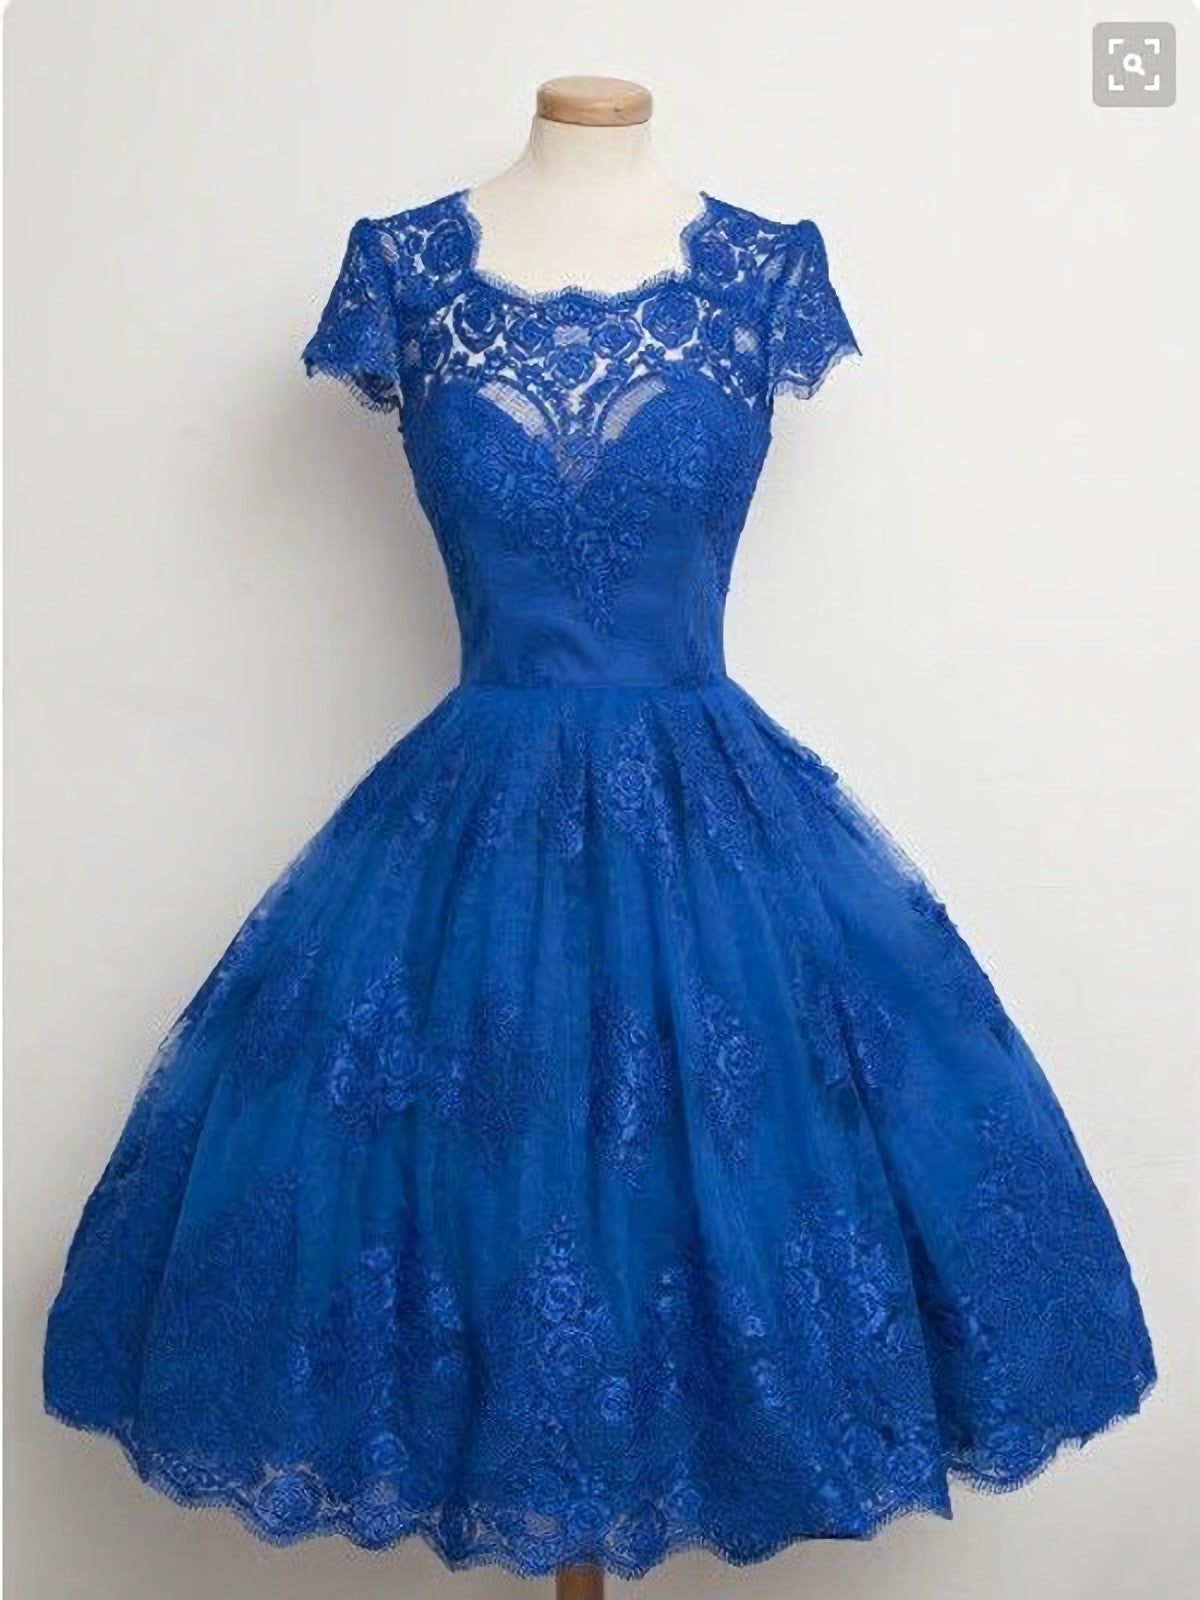 Lace Cap Sleeves Junior Blue Corset Homecoming Dresses outfit, Black Tie Wedding Guest Dress